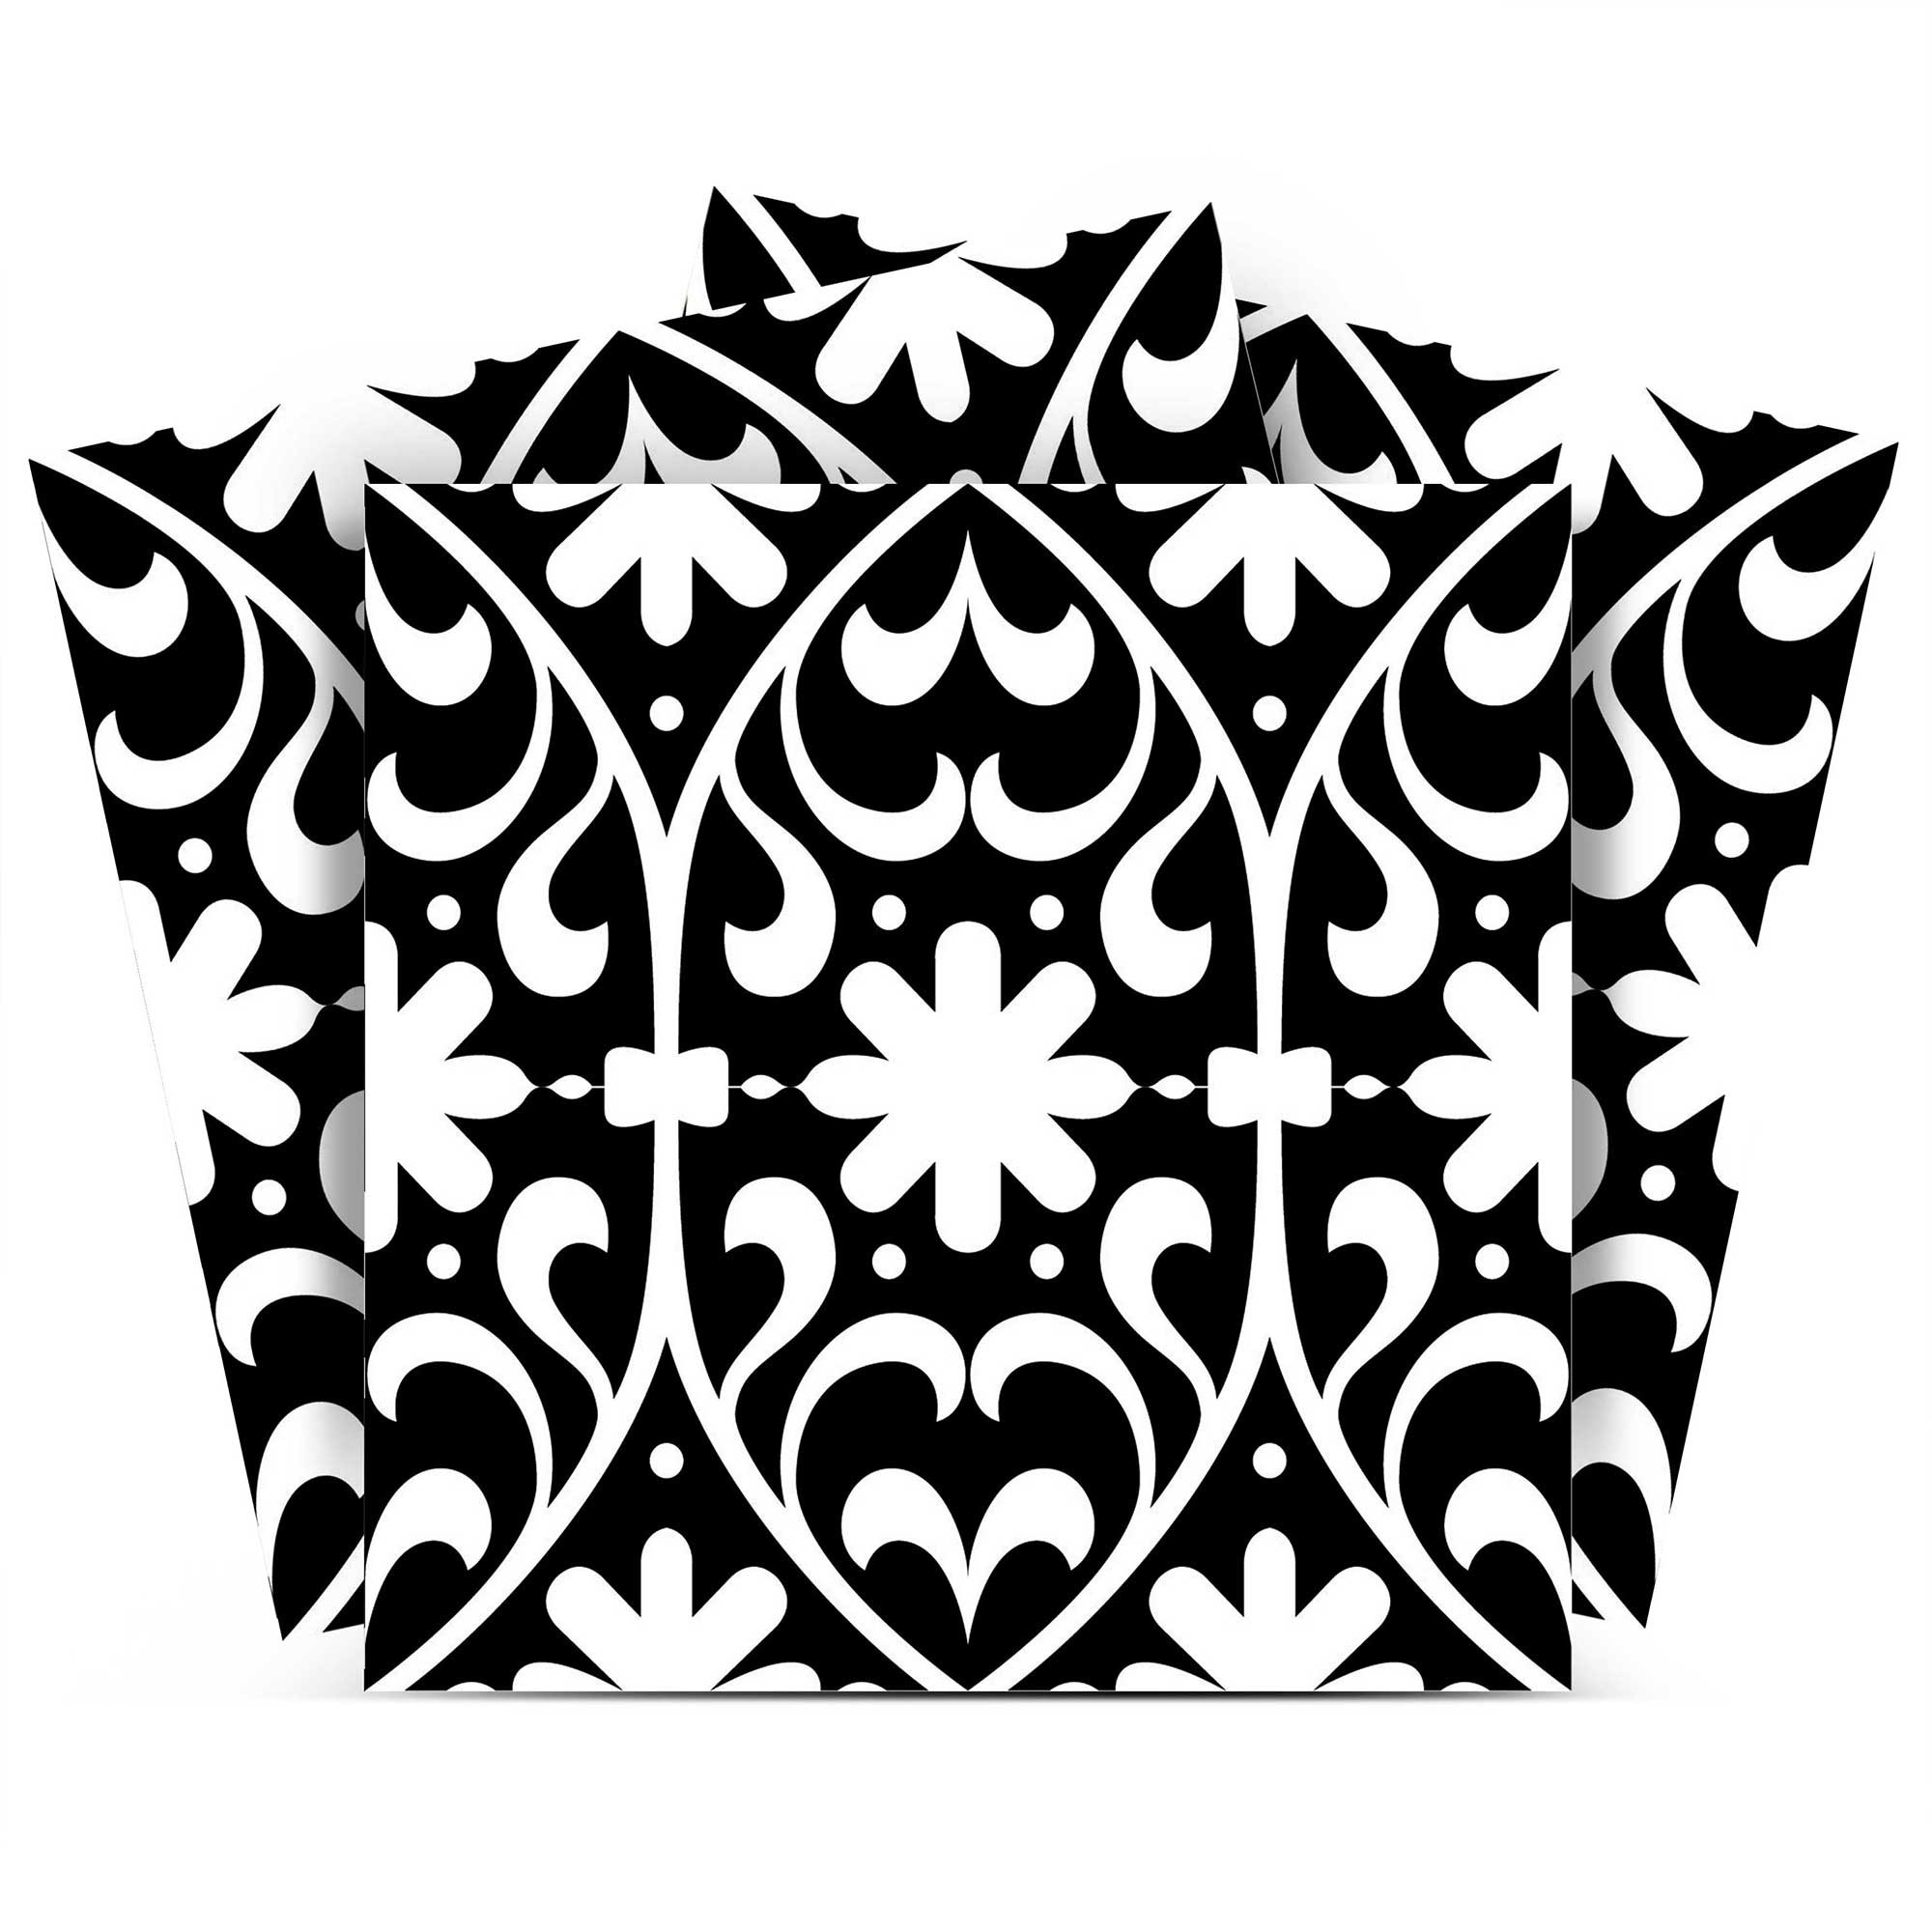 4" X 4" Black and White Floral Peel and Stick Removable Tiles-399875-1